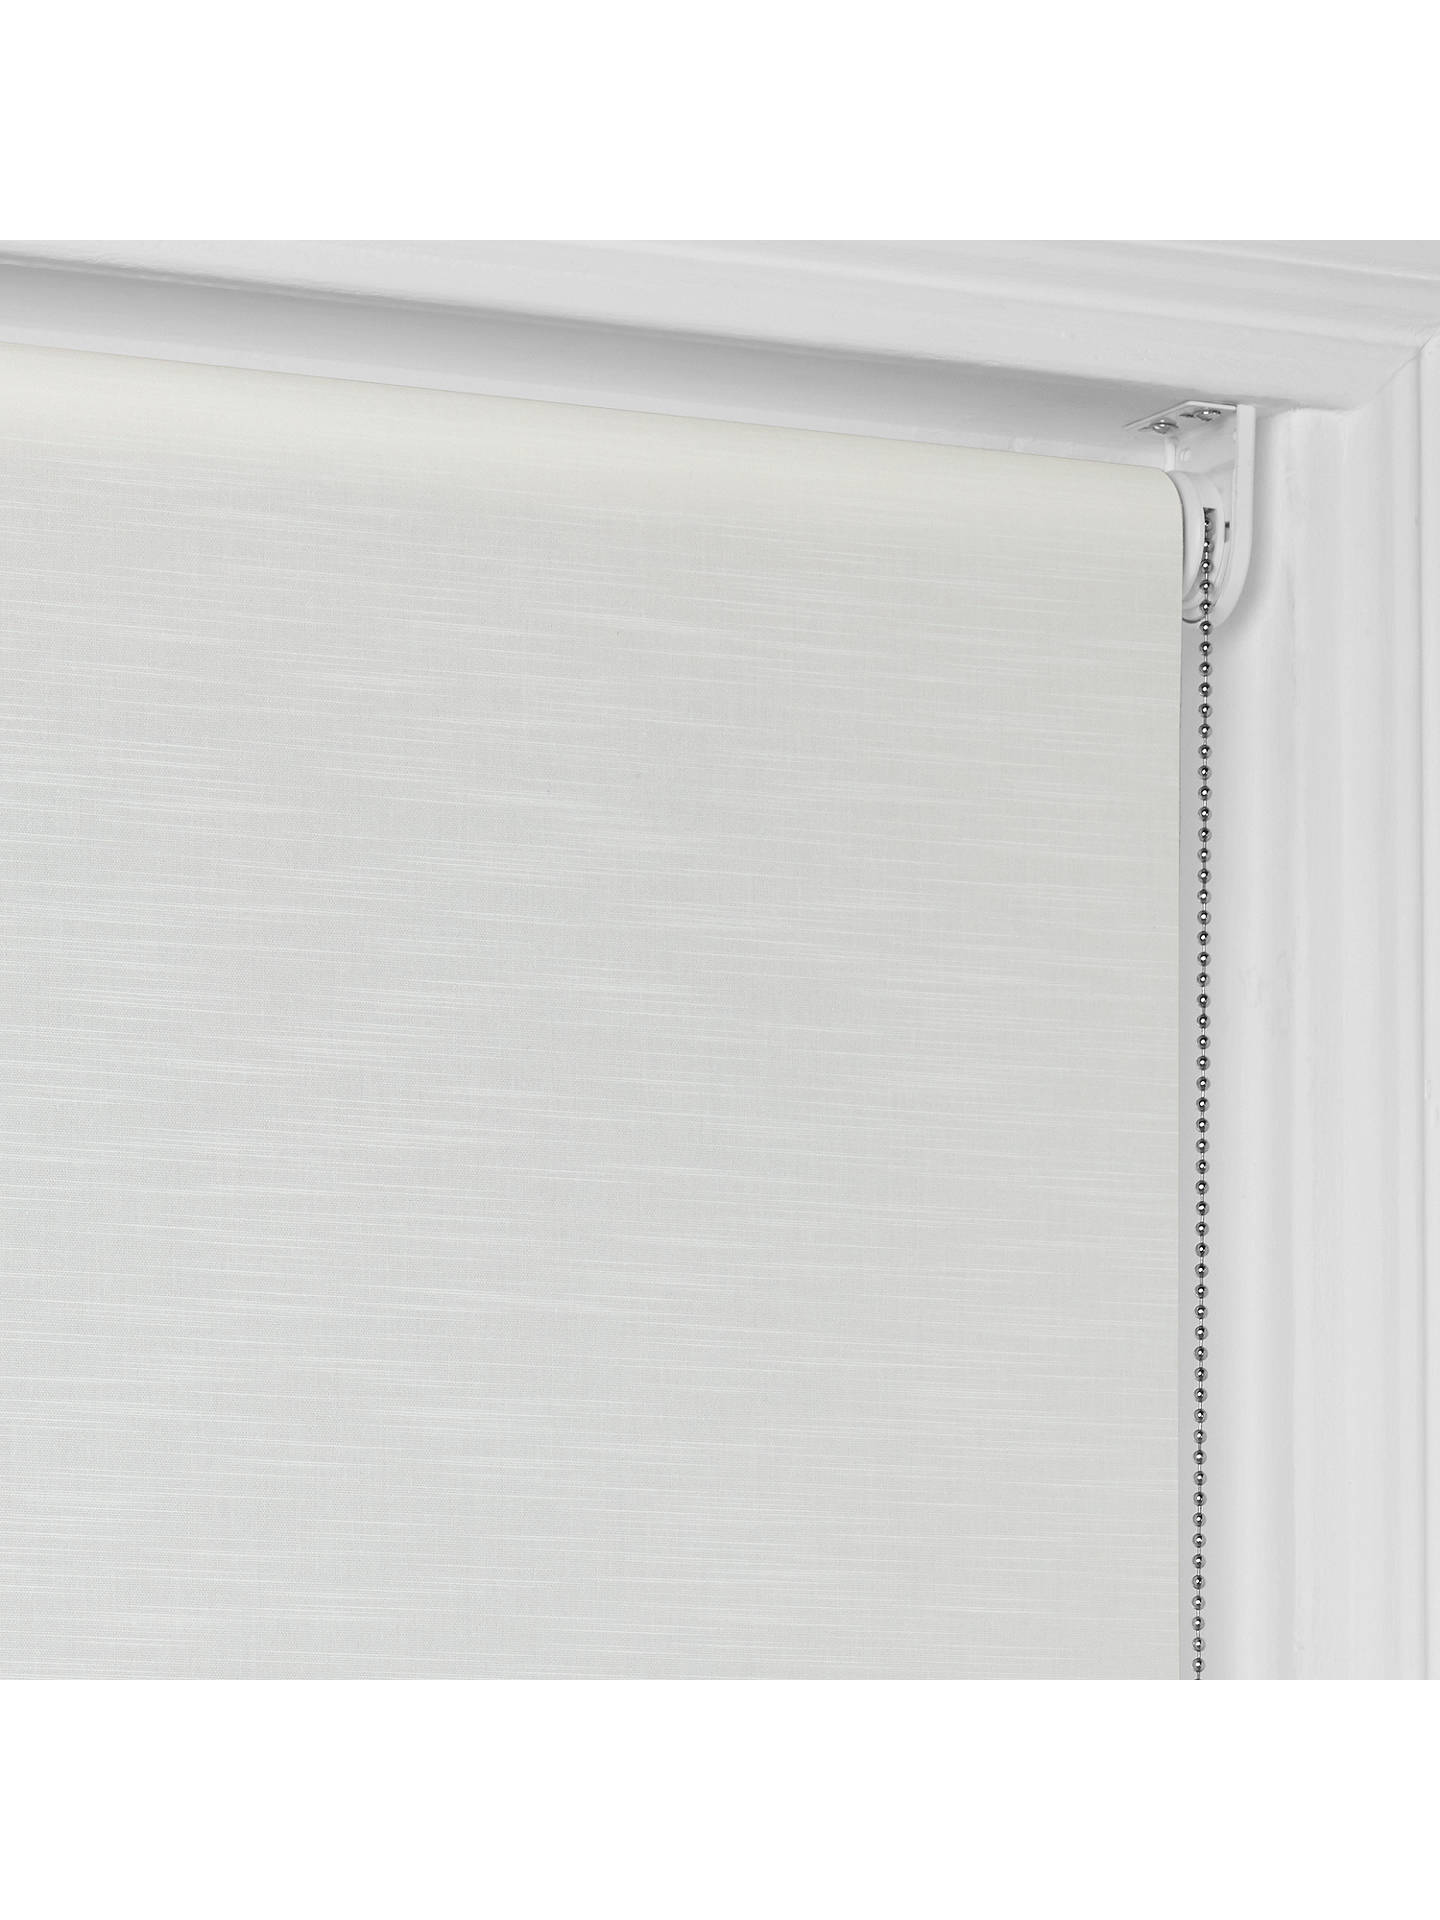 John Lewis Lima Made to Measure Daylight Roller Blind, White